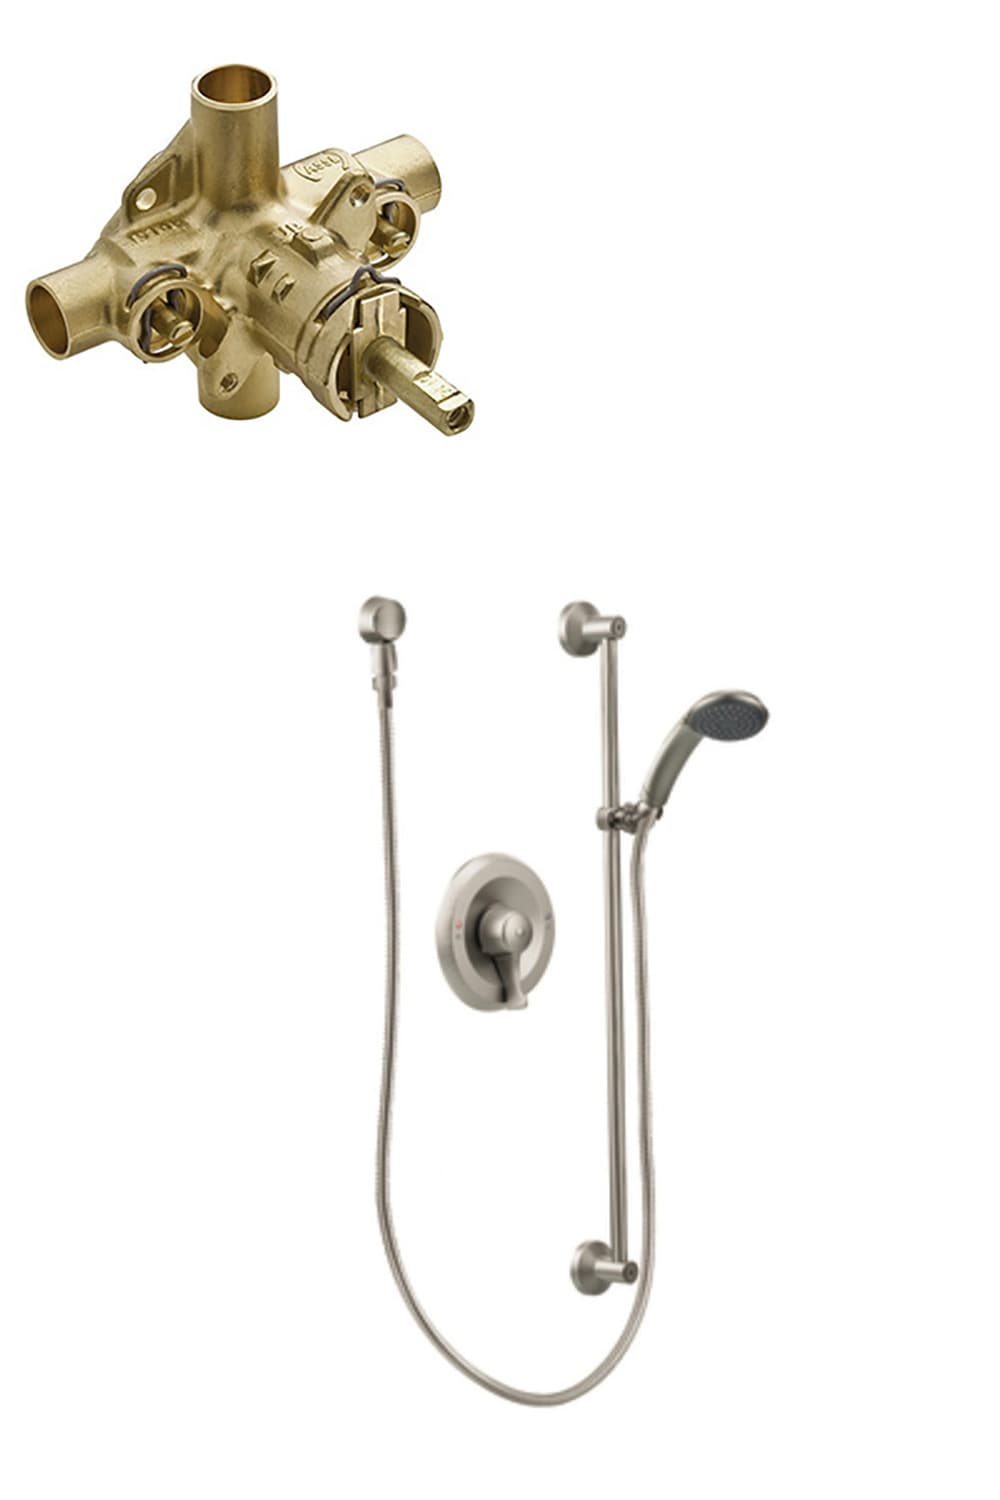 Commercial Brushed Nickel 1-handle Single Function Shower Faucet Valve Included | - Moen T8346EP15CBN-8371HDL